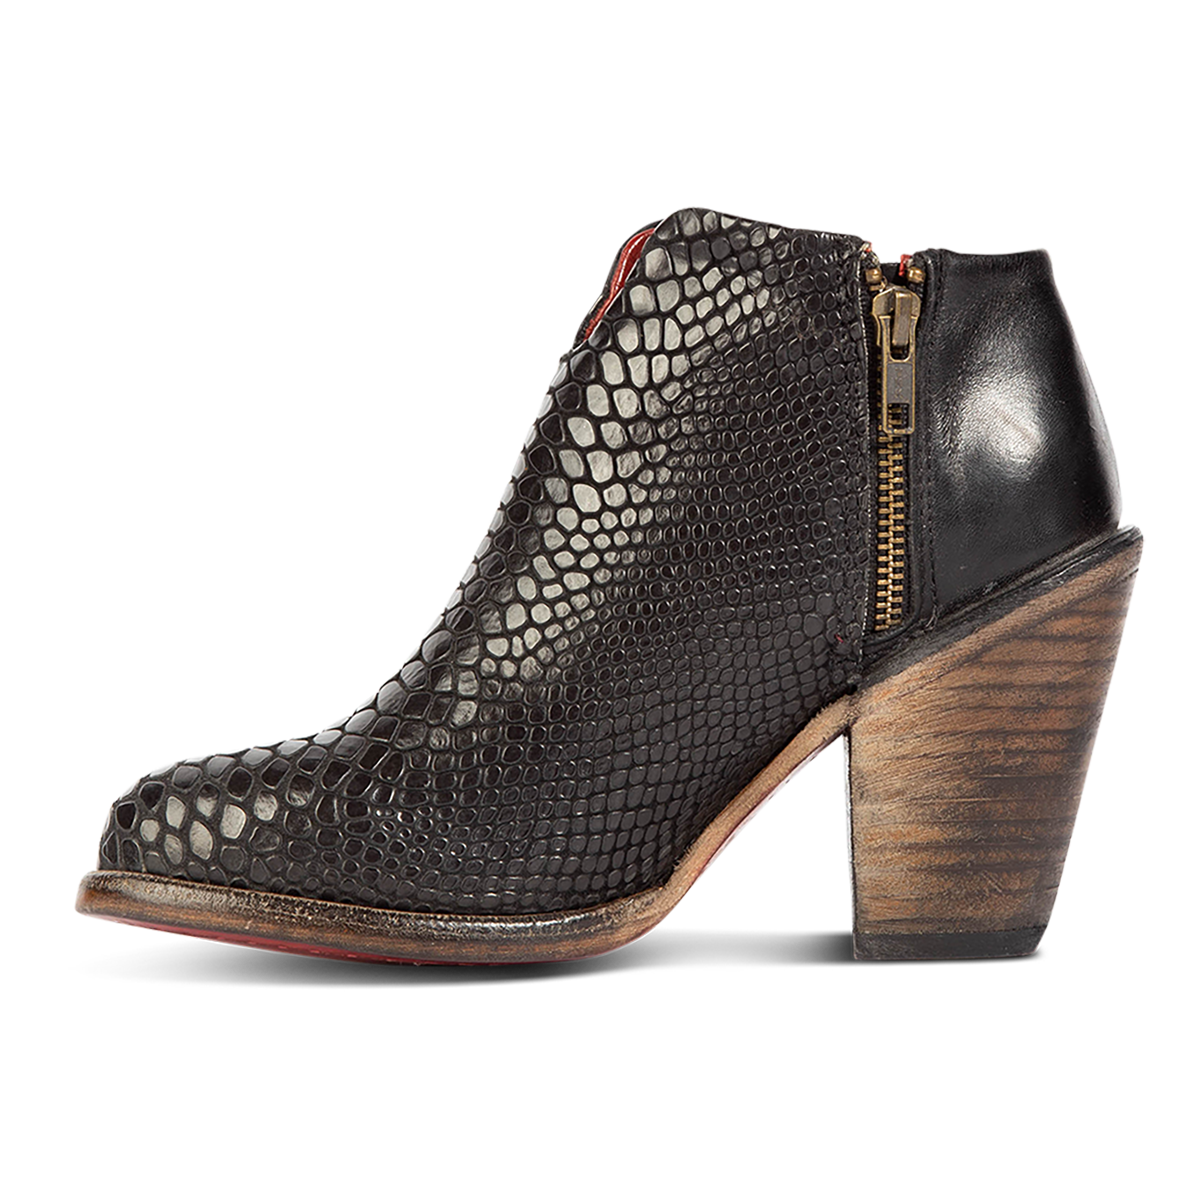 Inside view showing zip closure and two toned leather on FREEBIRD women's Detroit black snake bootie